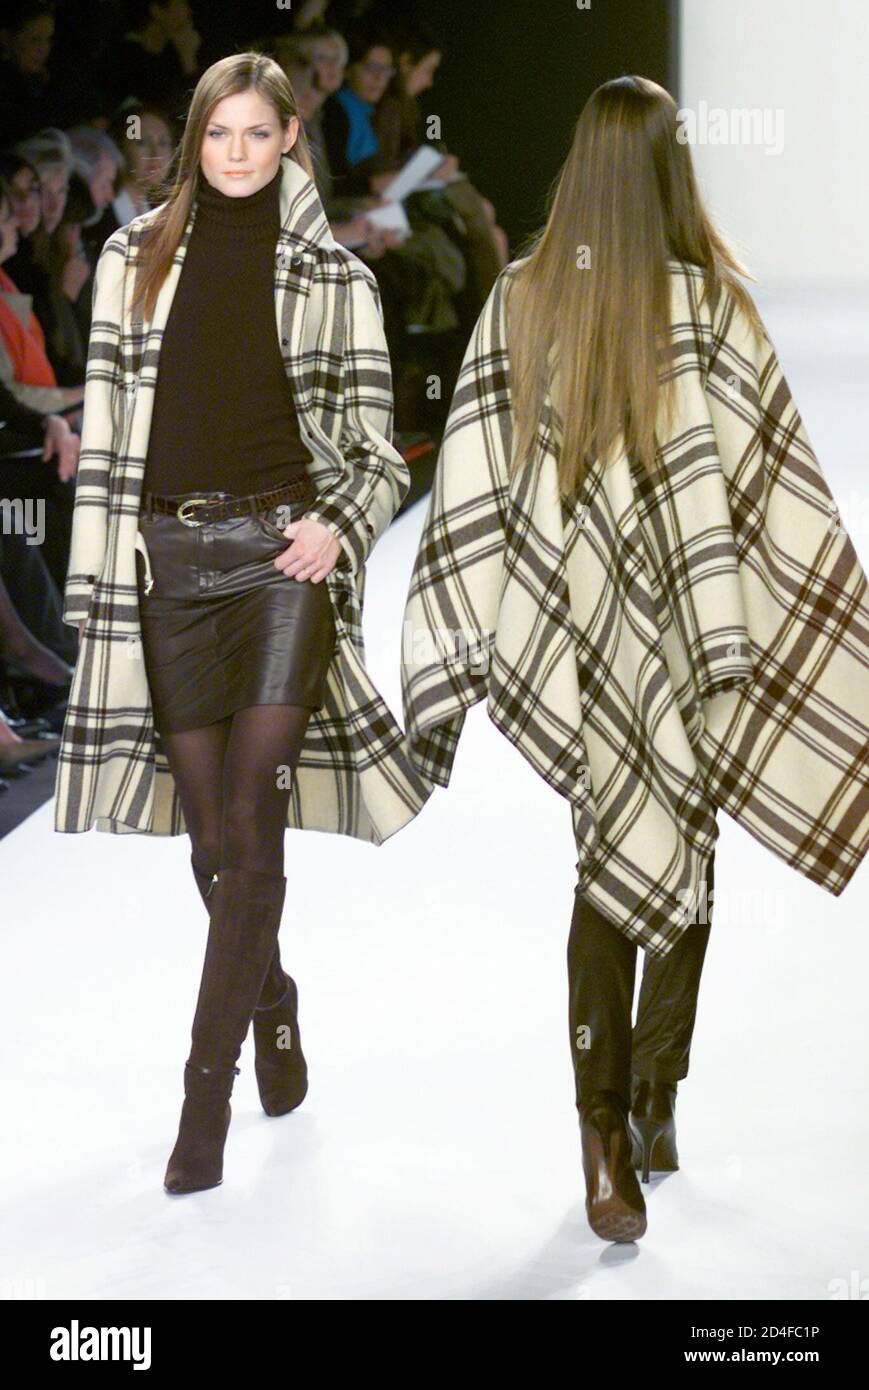 A model for designer Ralph Lauren wears a cream/brown double face cashmere  blend blanket plaid coat with ebony cashmere turtleneck and espresso  leather skirt (L) as she passes another model wearing a